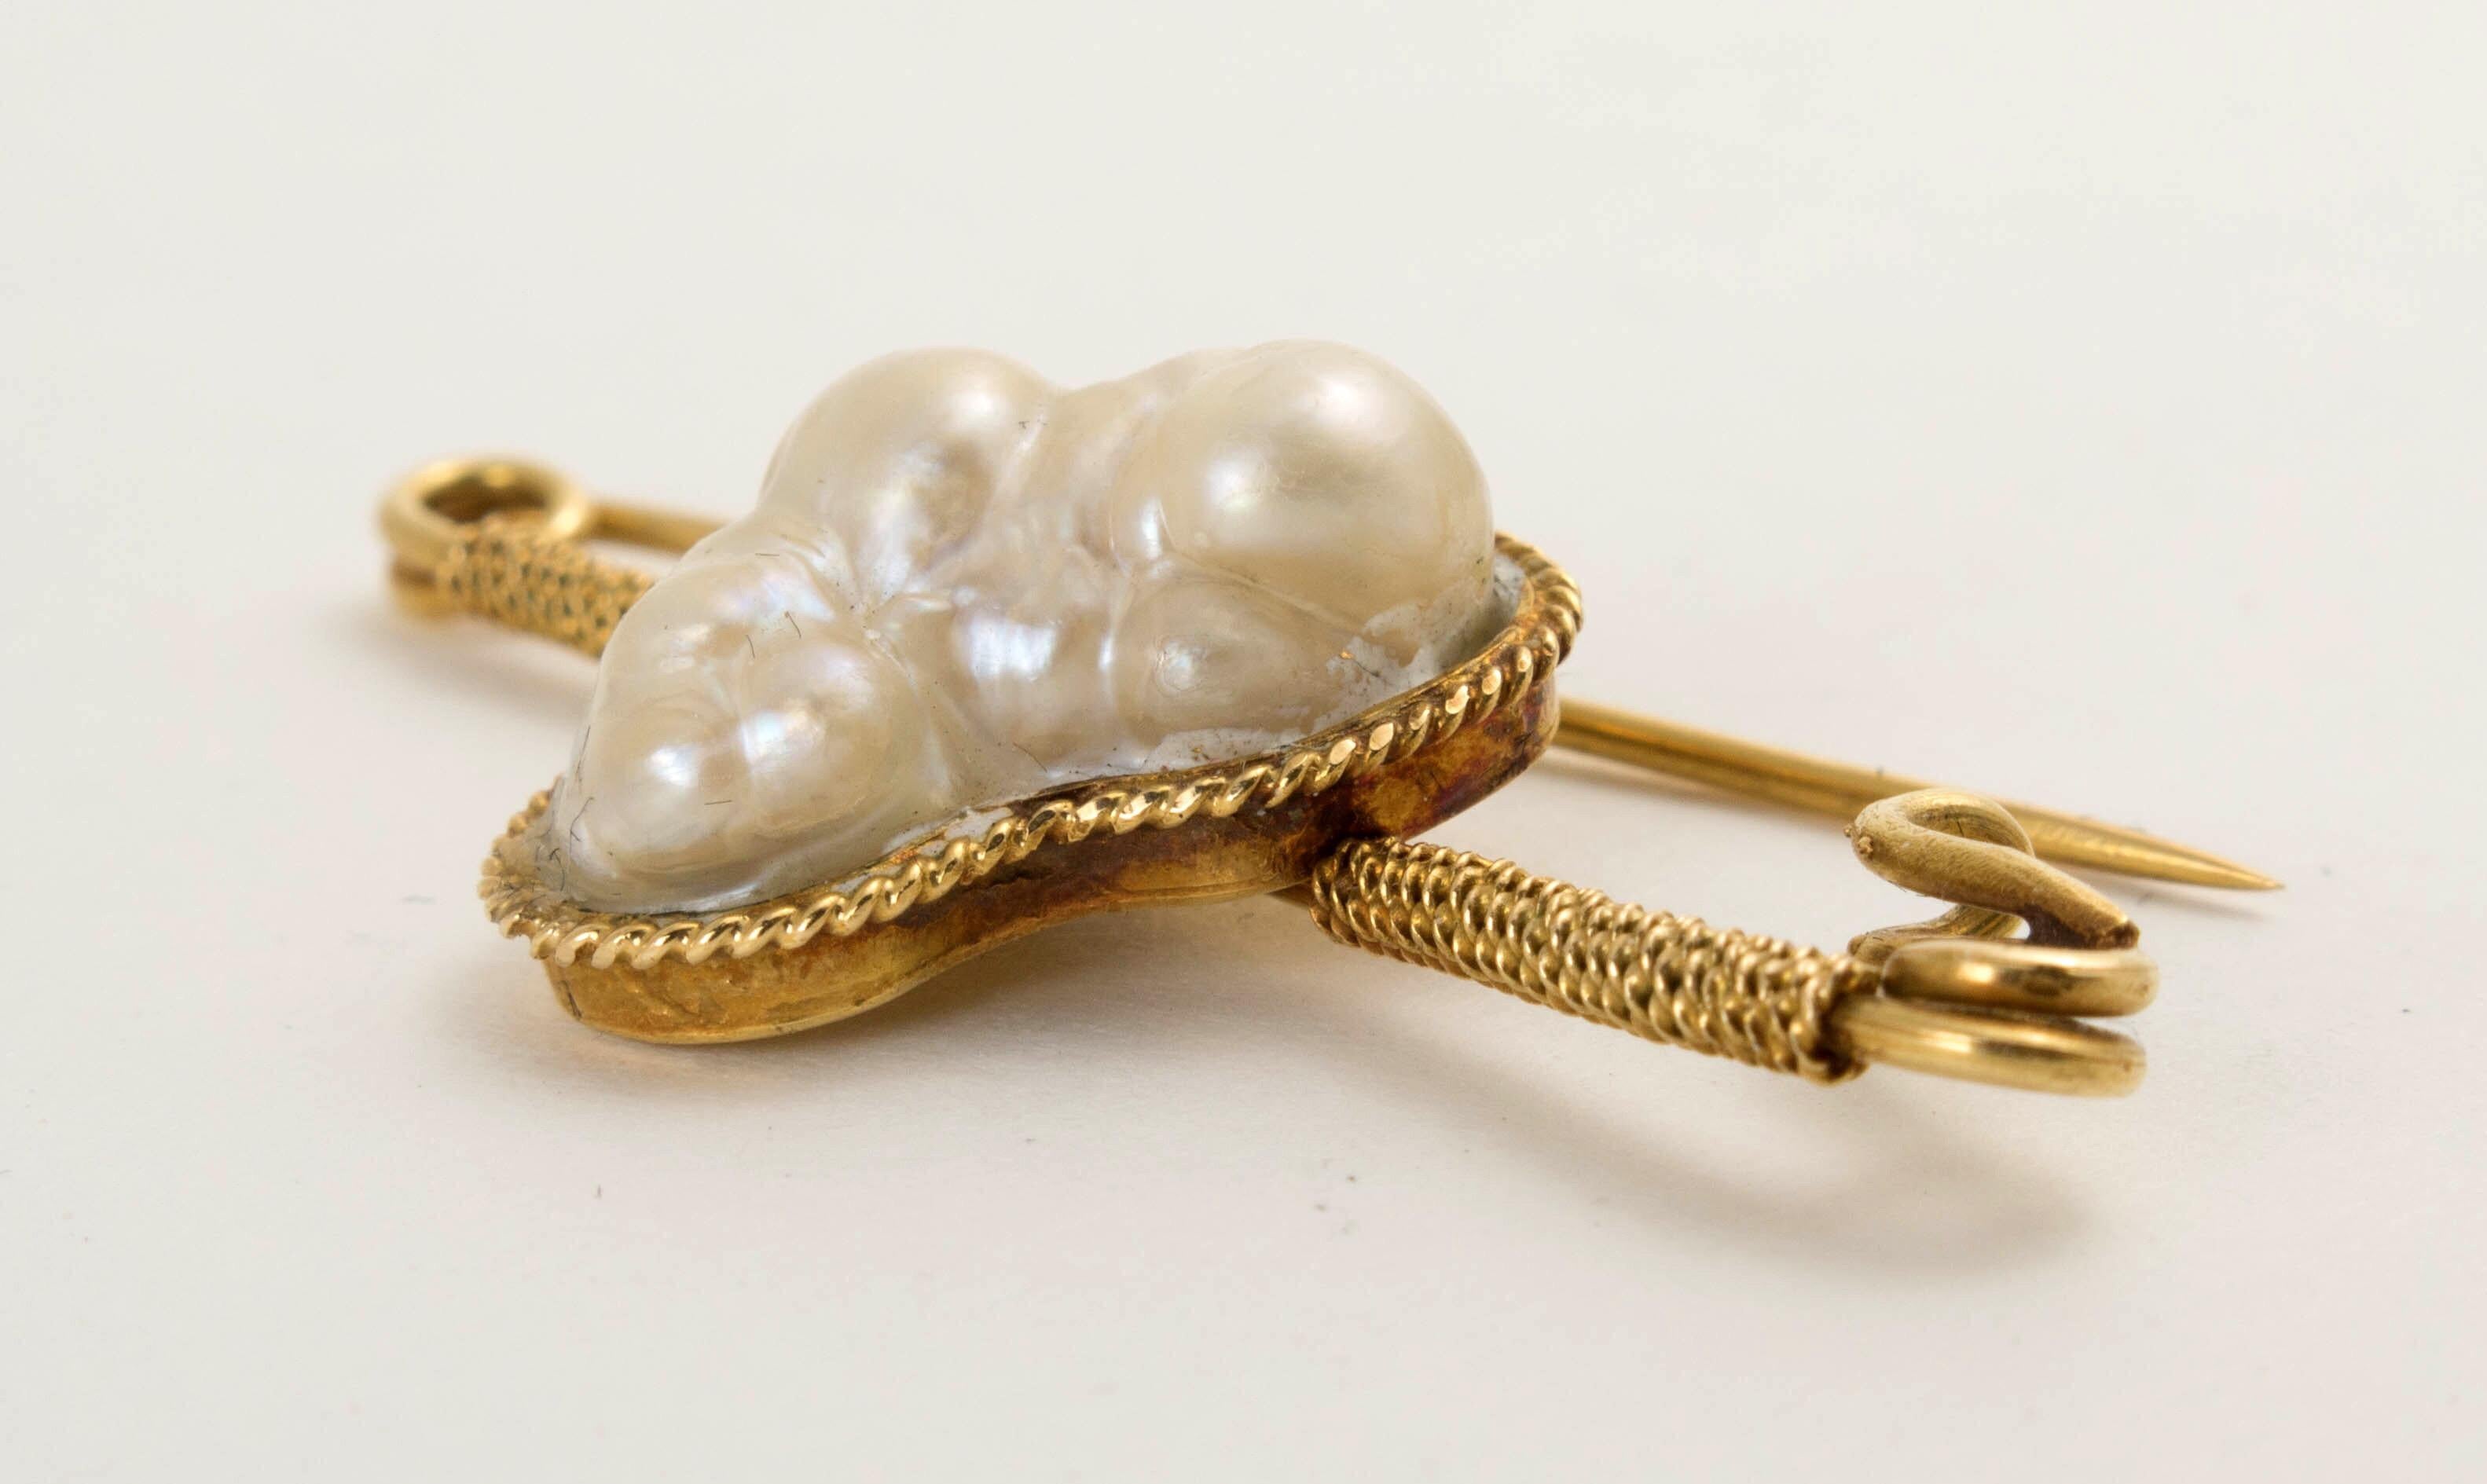 GIA certified blister pearl brooch in 14k yellow gold featuring one large natural saltwater blister pearl, undrilled. Come with Gemological Institute of America (GIA) report stating pearl size is 18.51 x 13.46 mm, cream body color, saltwater blister